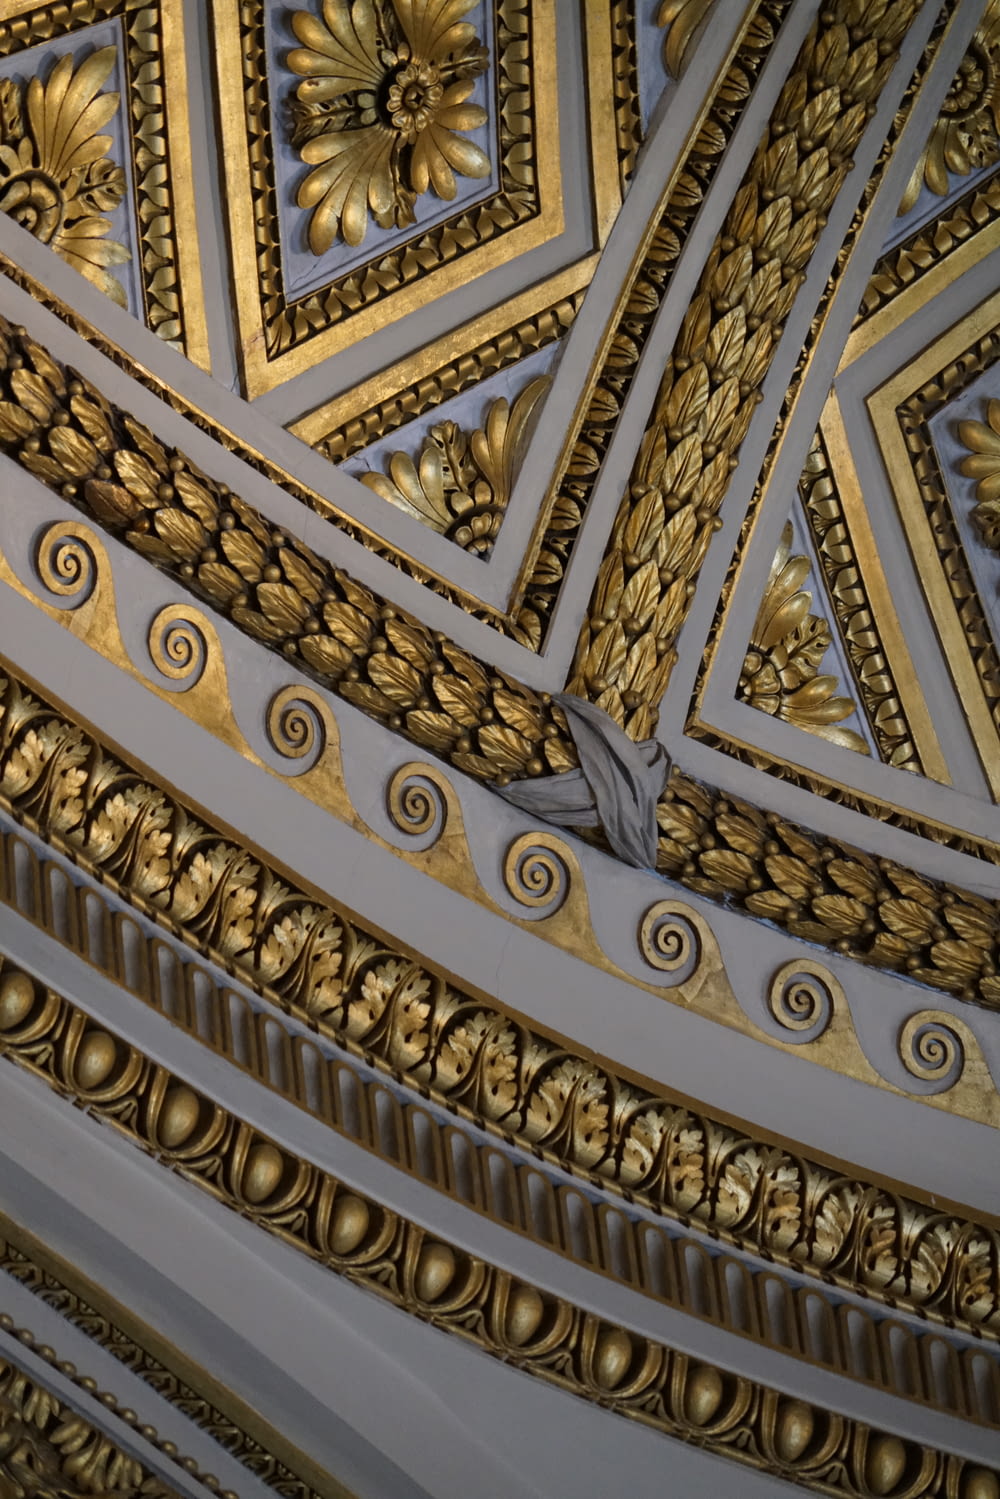 a close up view of a ceiling with gold decorations